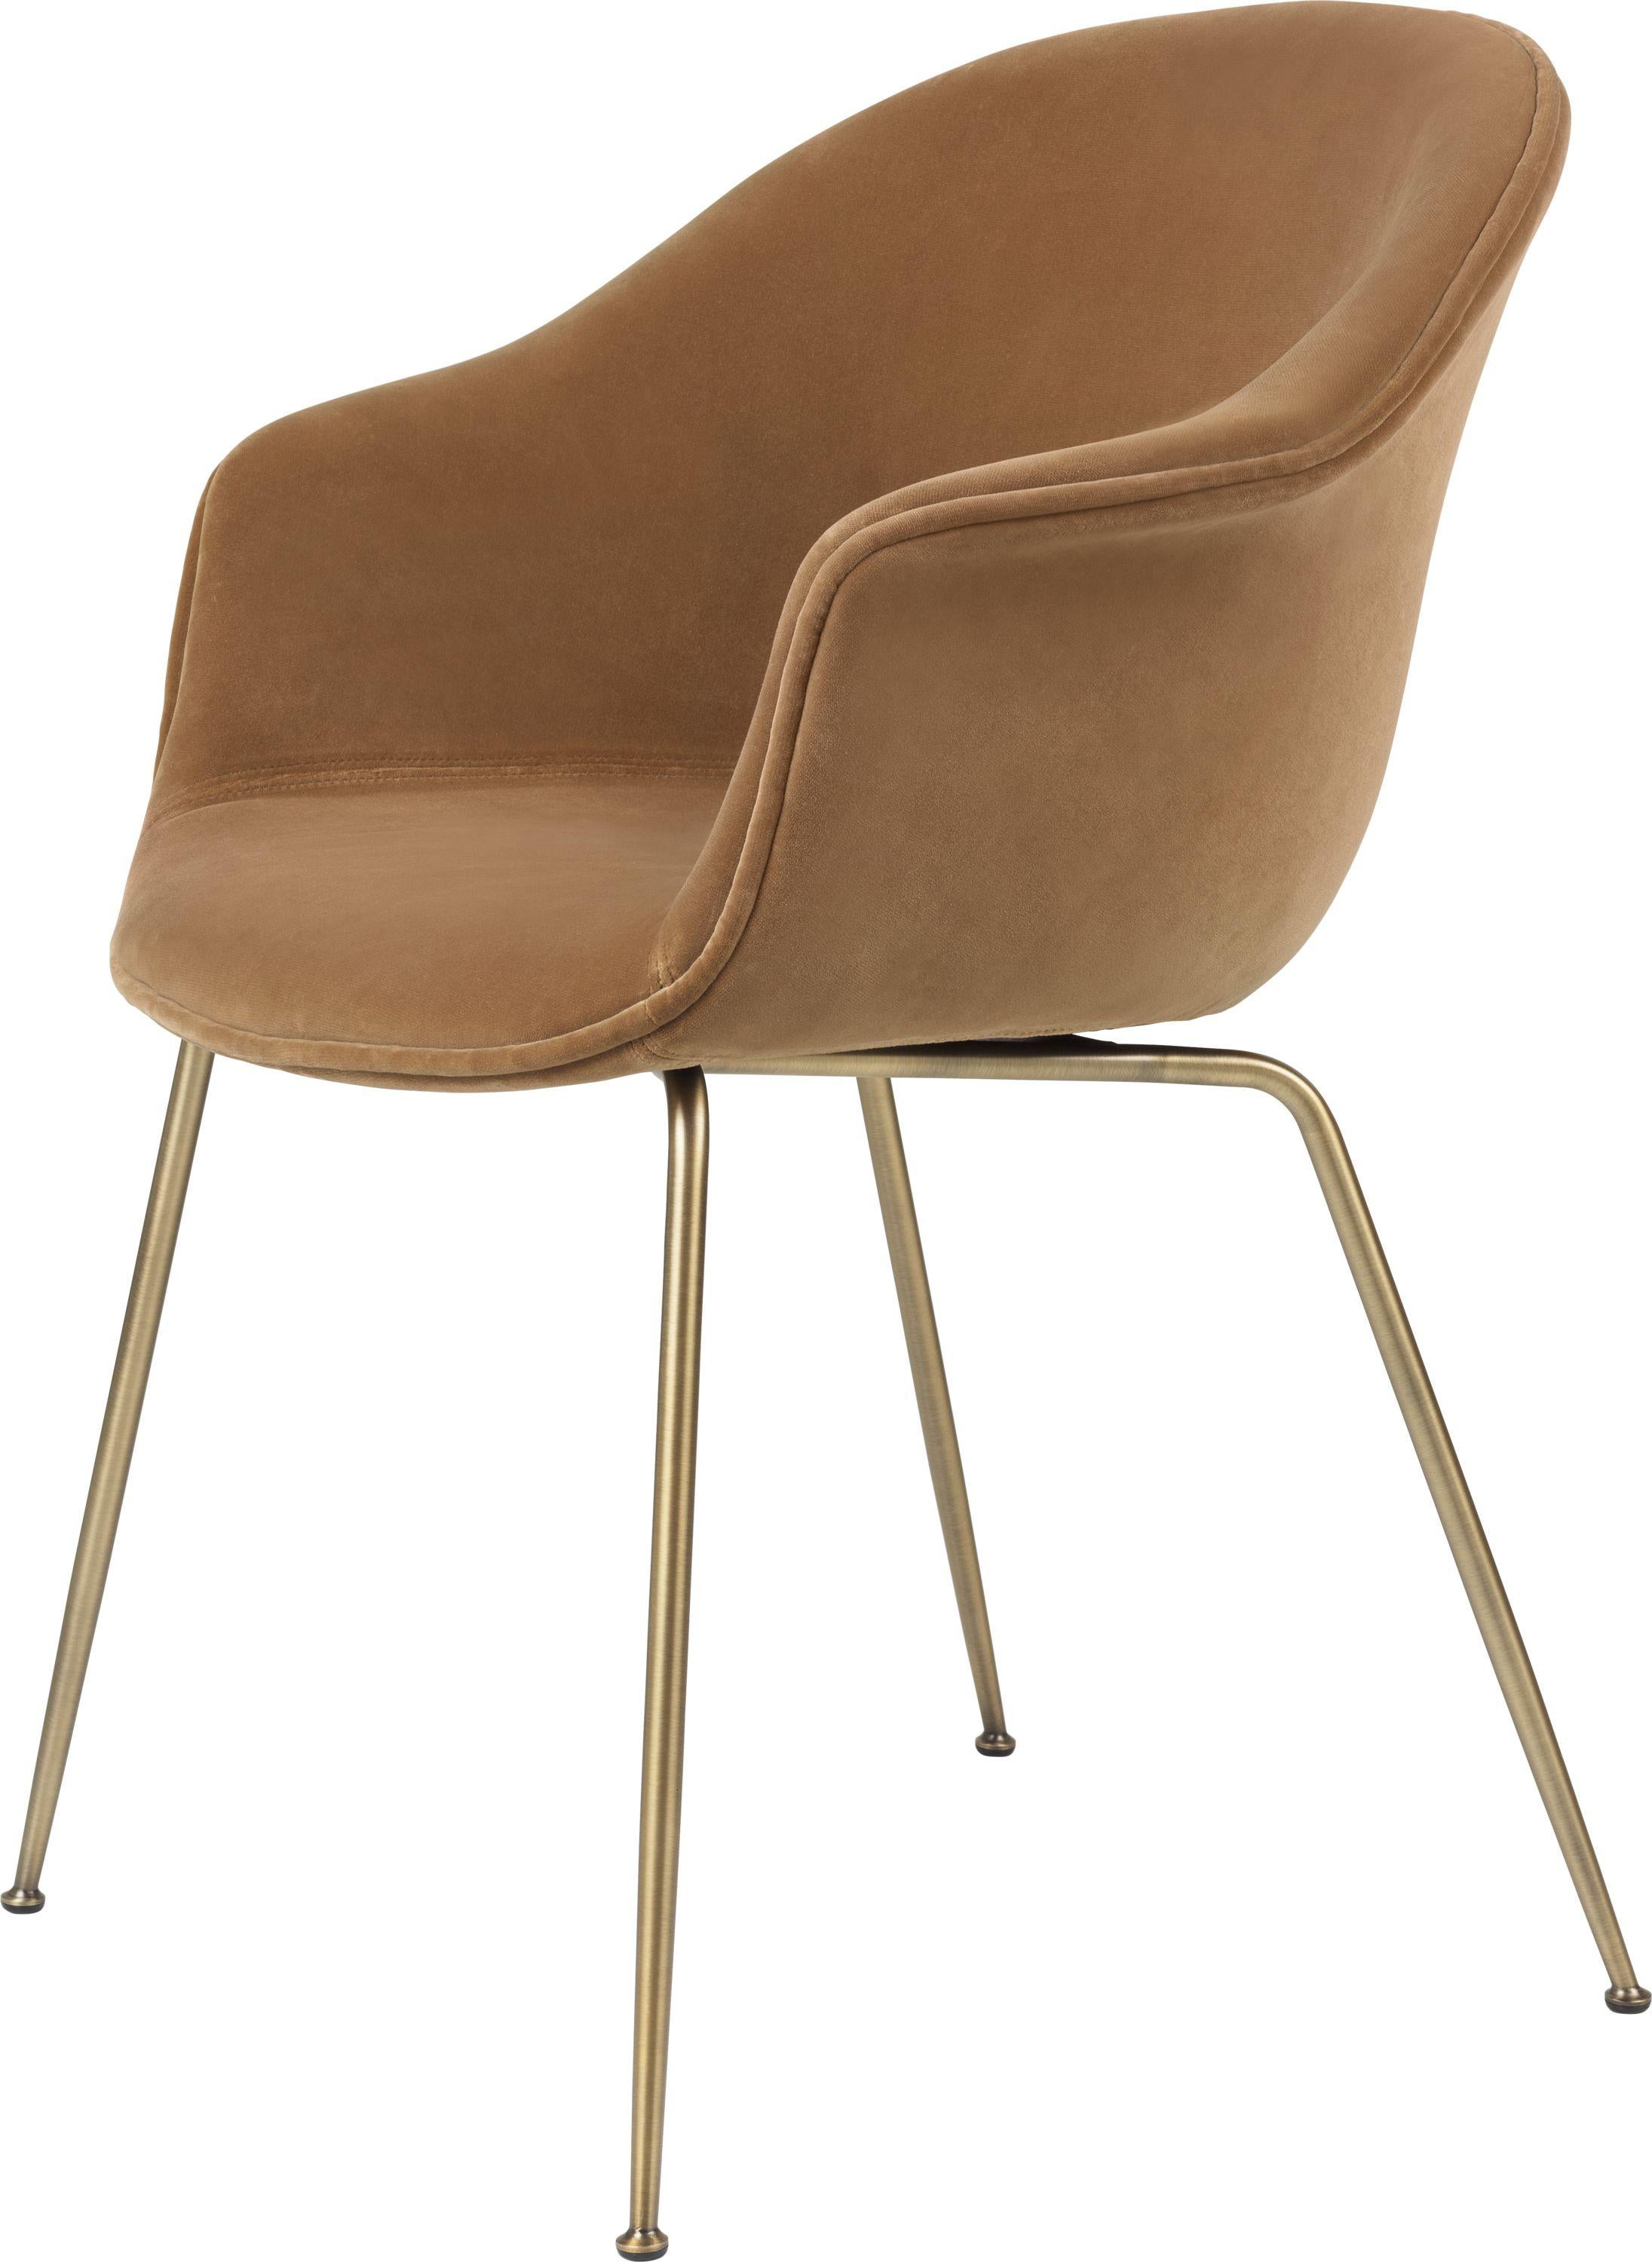 GamFratesi 'Bat' Dining Chair in Grey with Antique Brass Conic Base 3